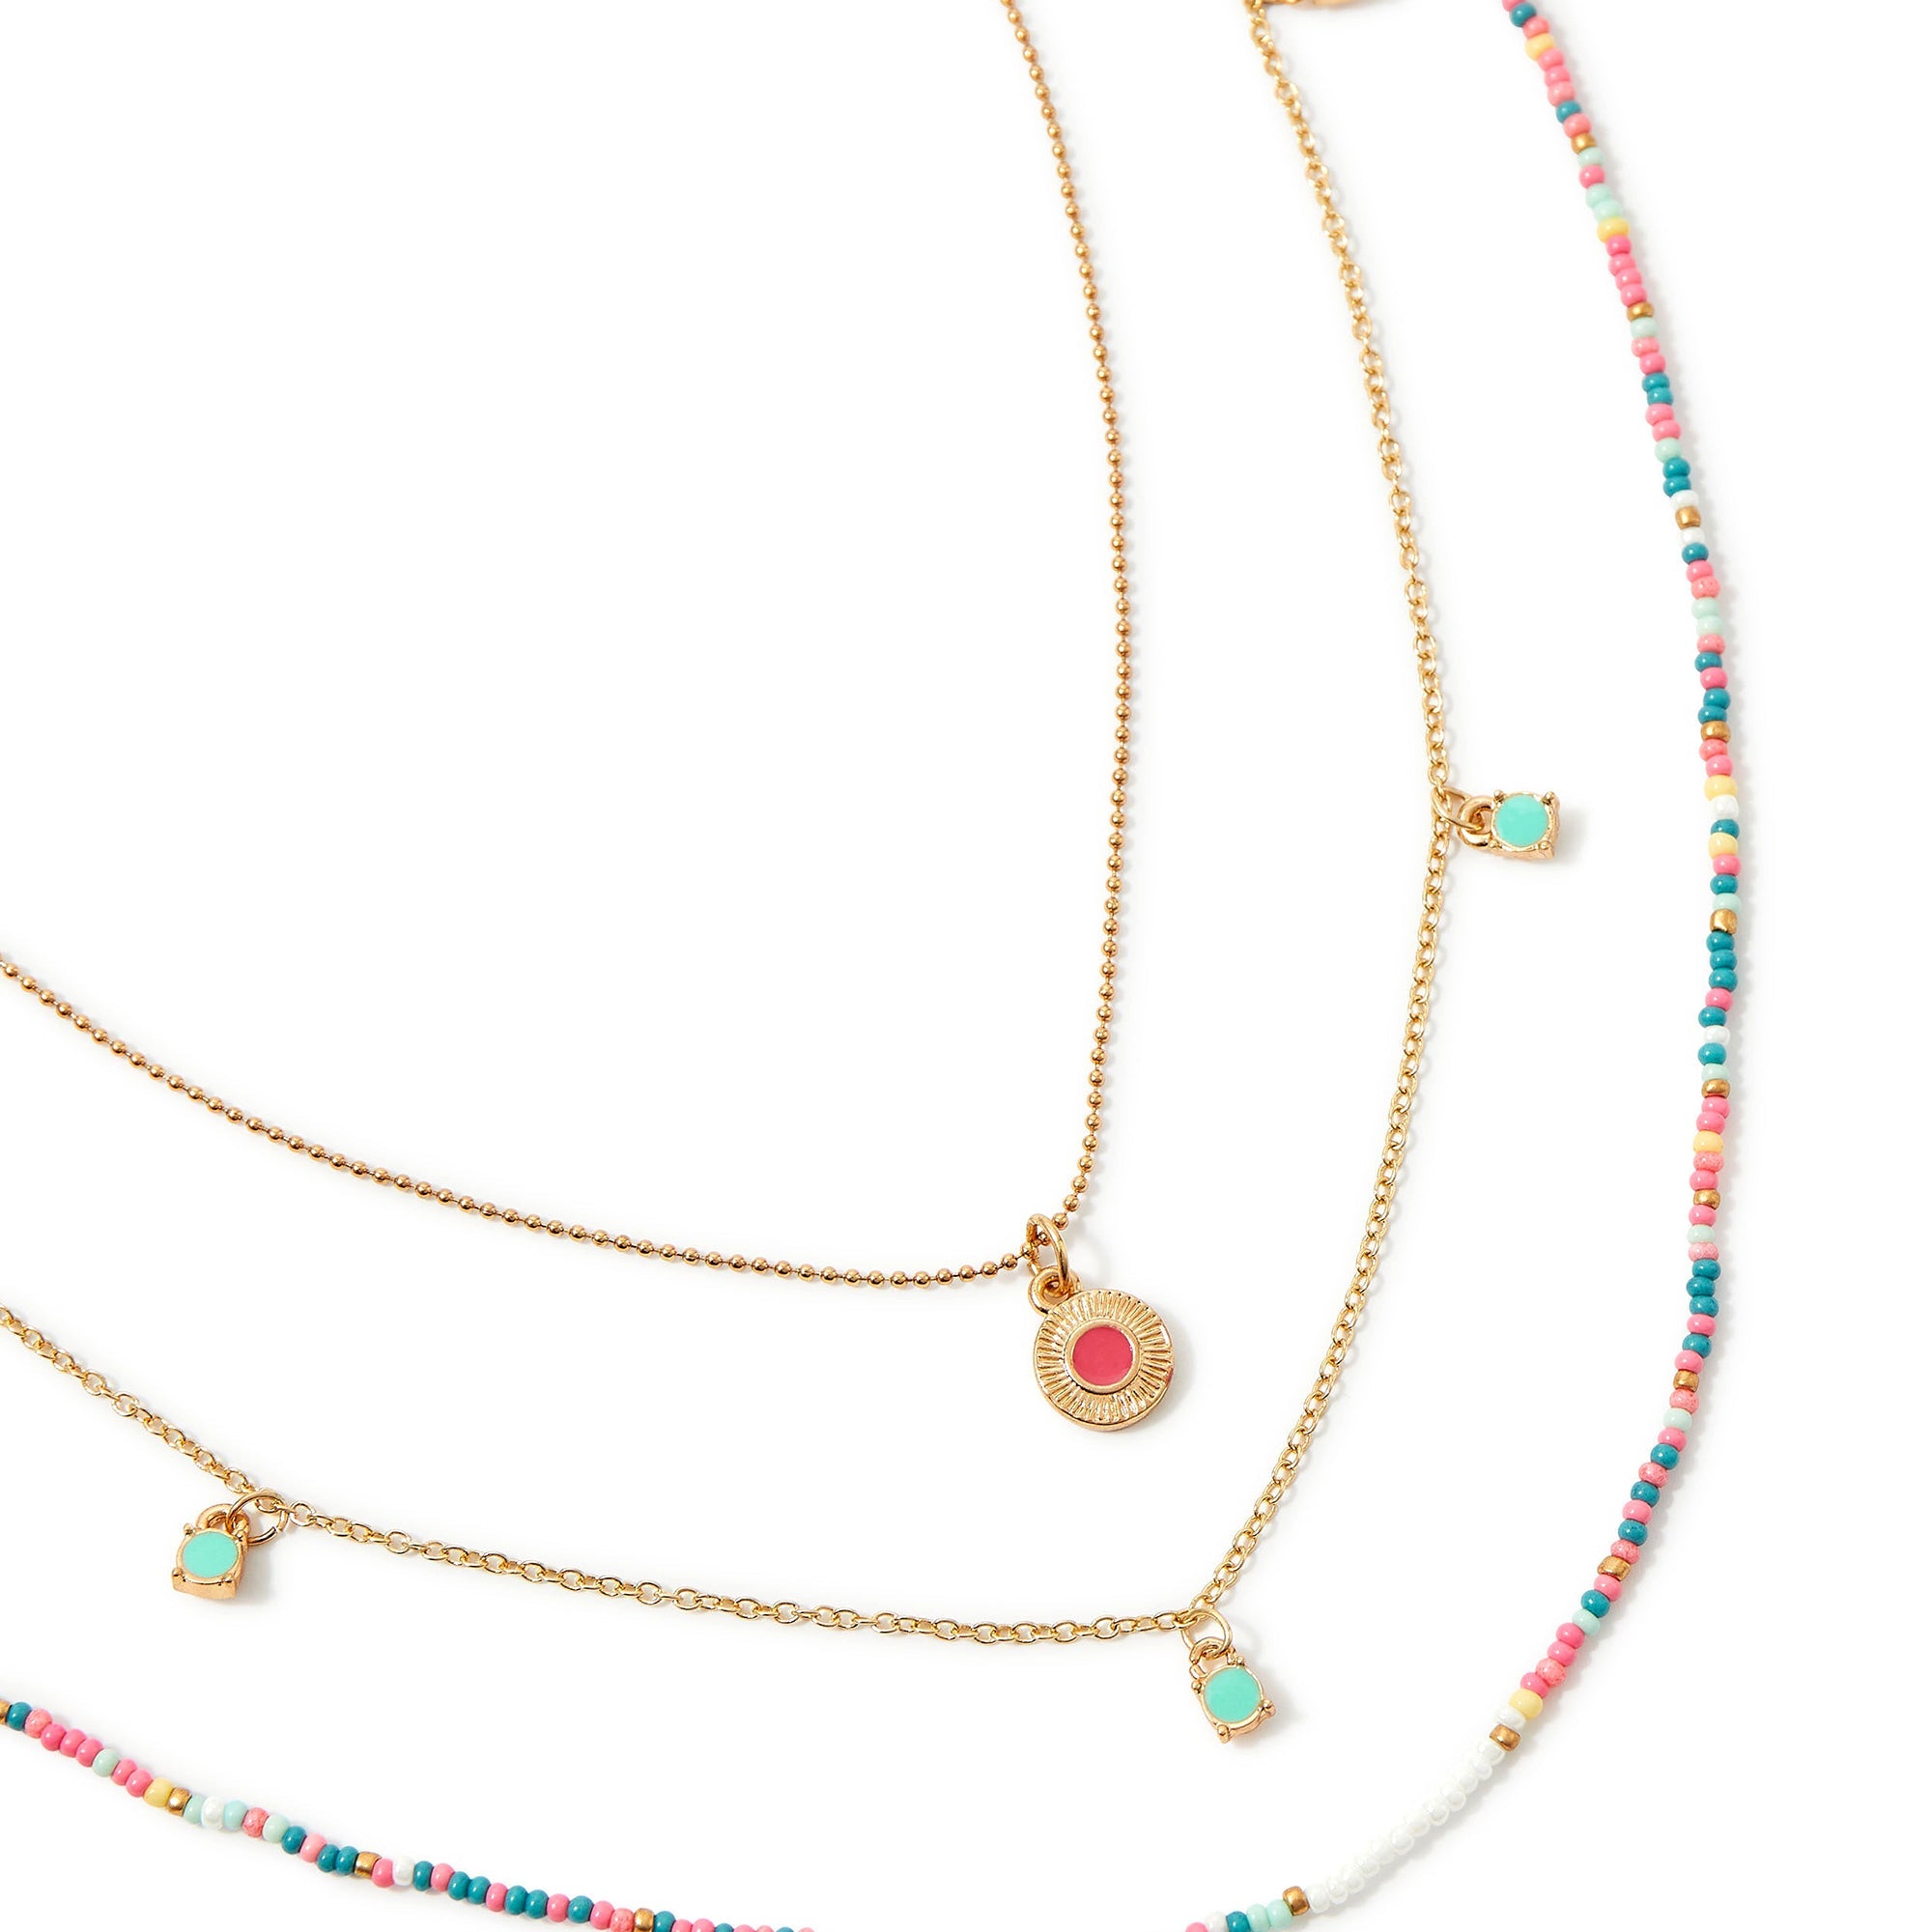 Accessorize London Women'S Seascape Set Of 3 Seedbead And Charms Layered Necklace